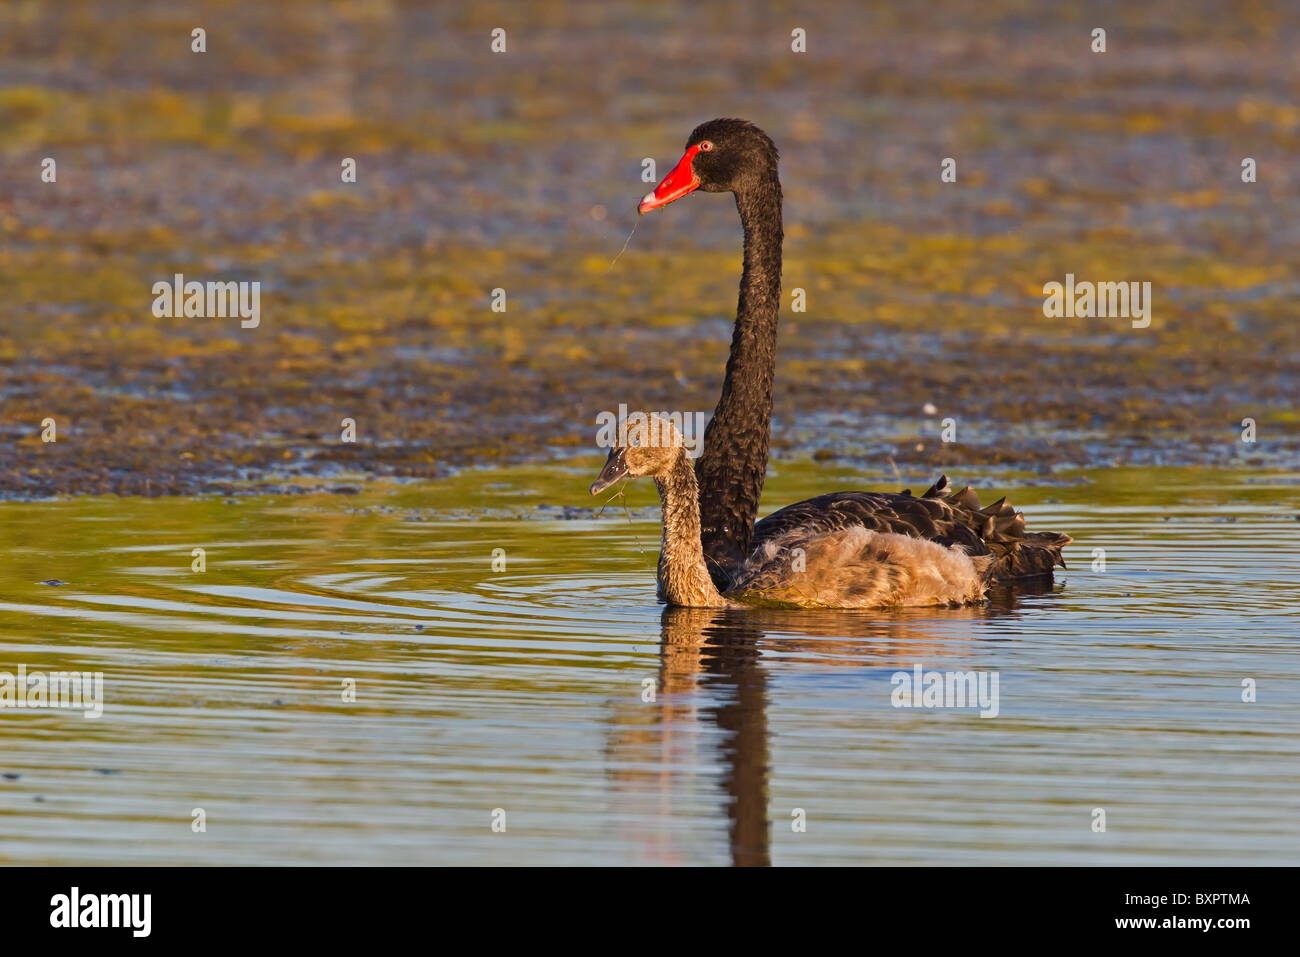 BLACK SWAN WITH CYGNET ON WATER Stock Photo